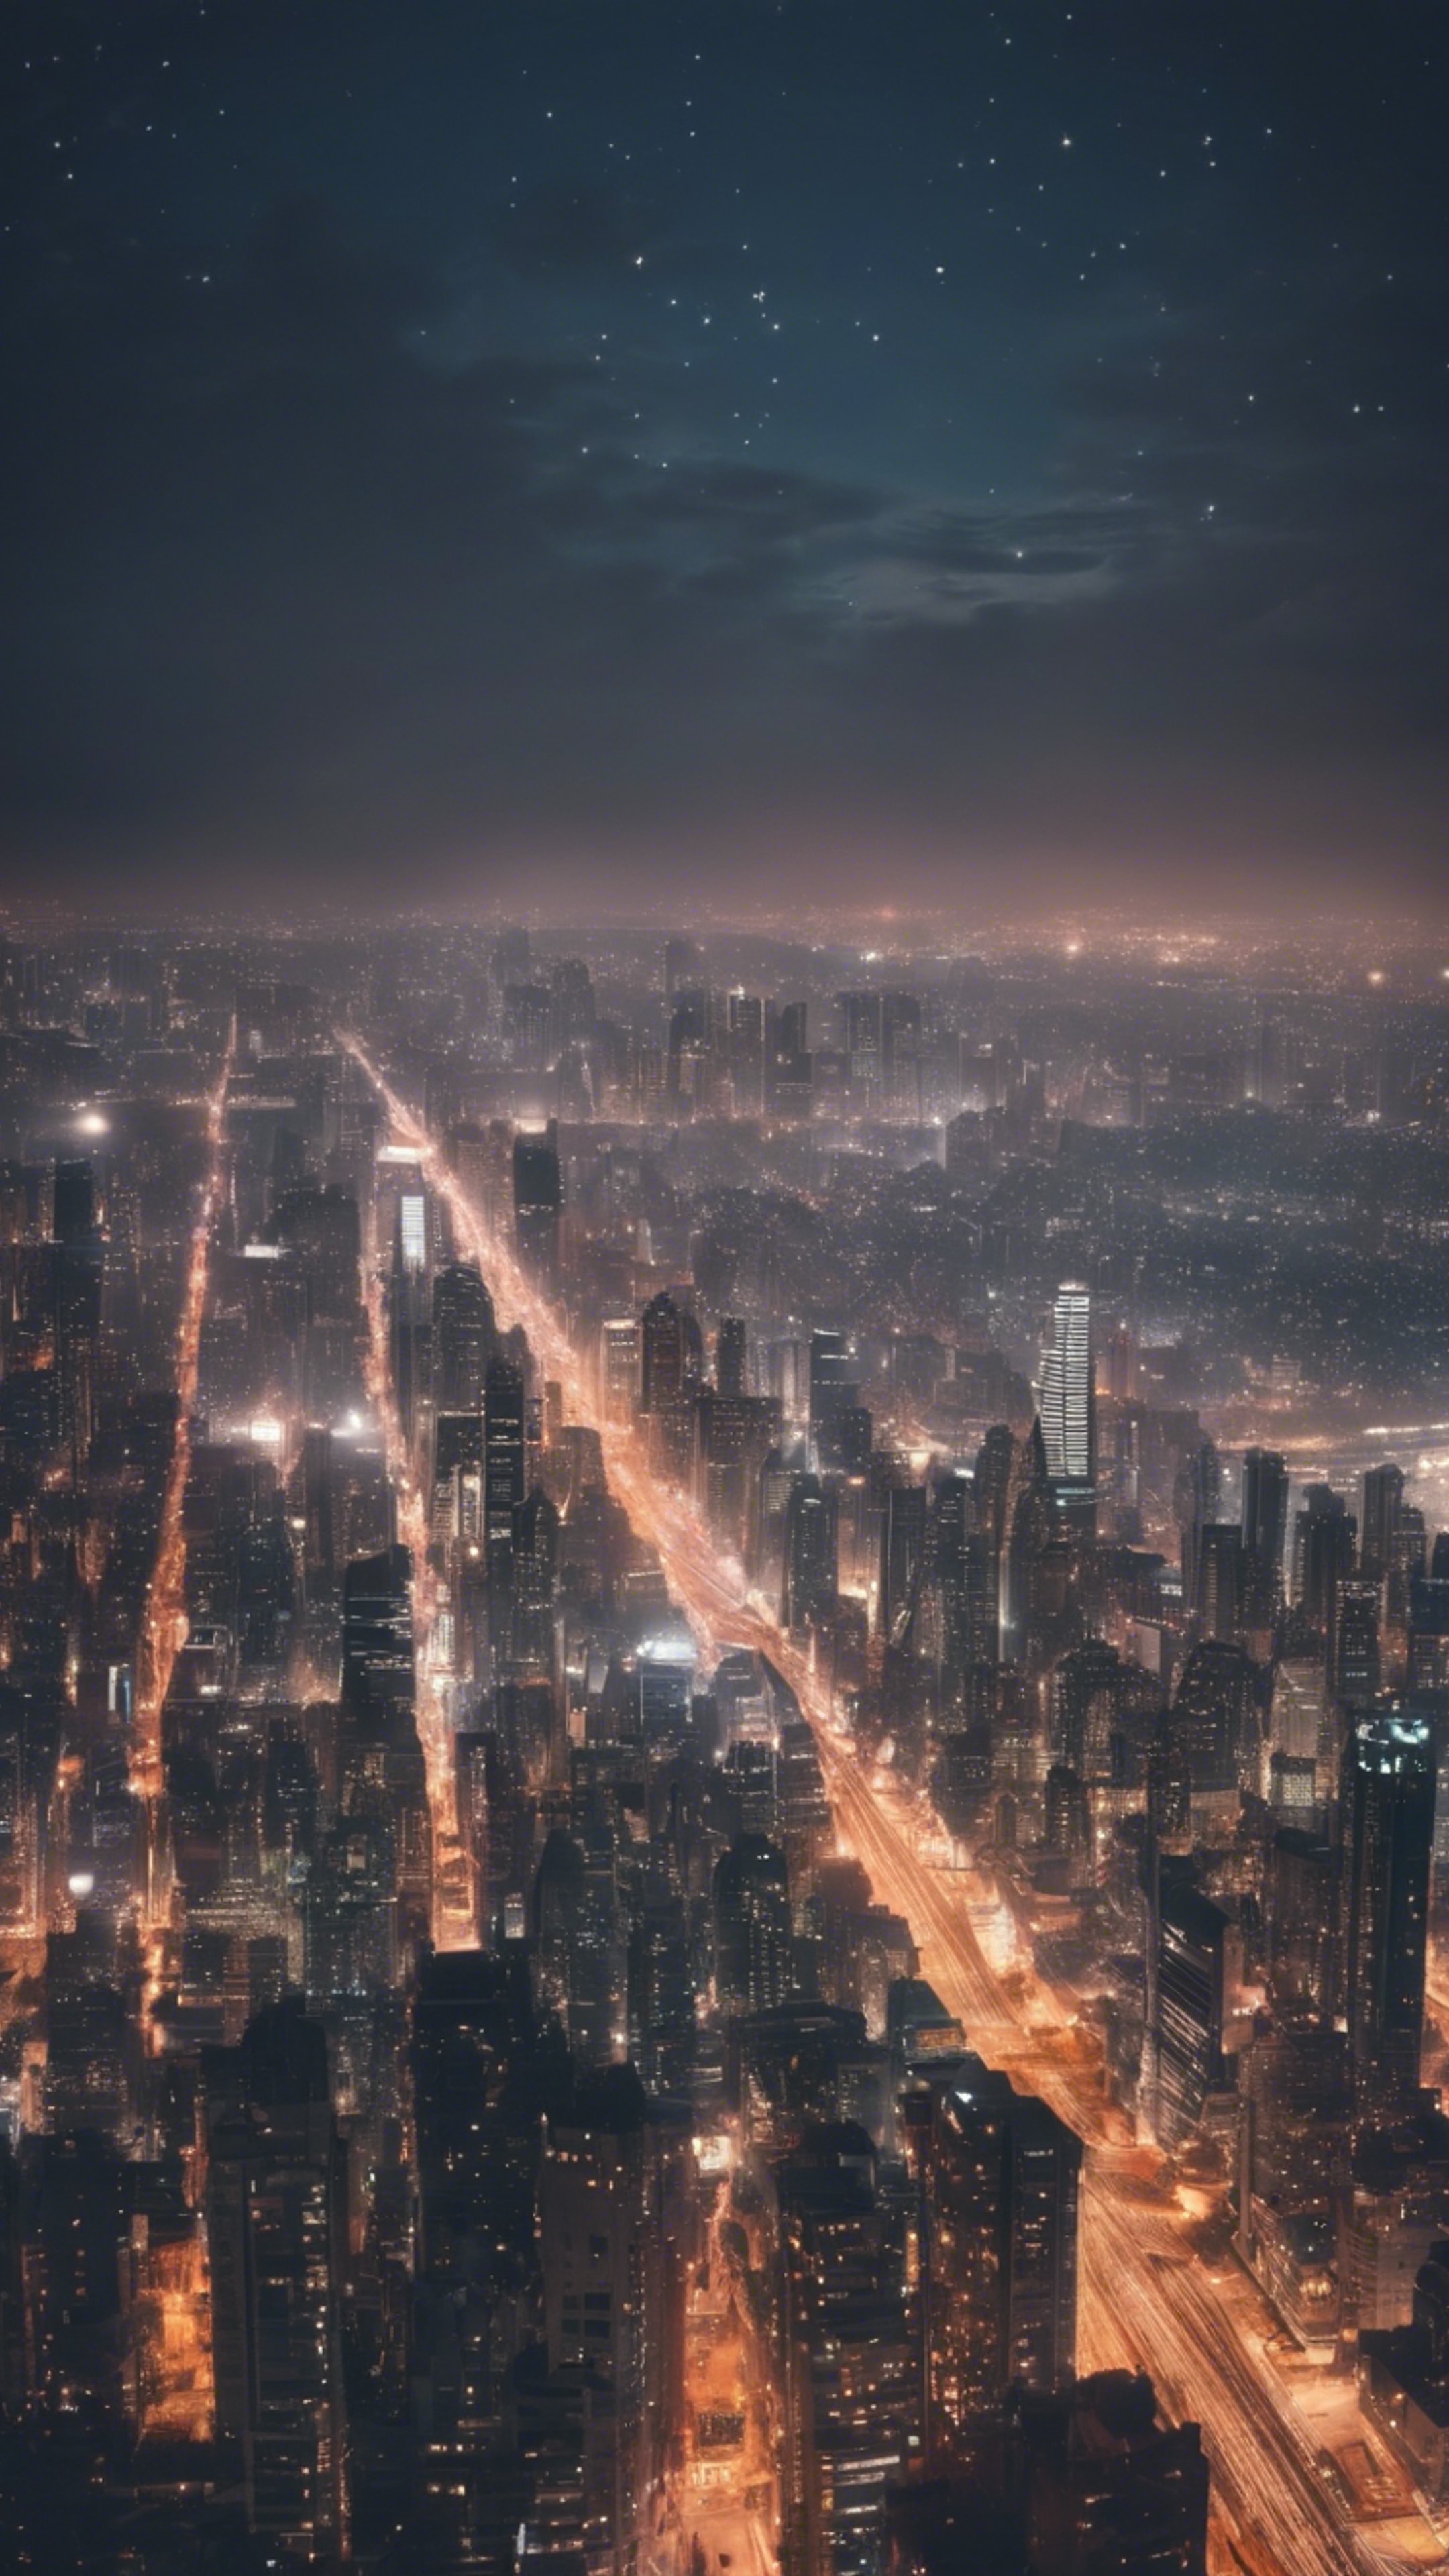 A captivating city skyline at dusk, with twinkling lights coming alive one by one.壁紙[93917d0c571843ad8162]